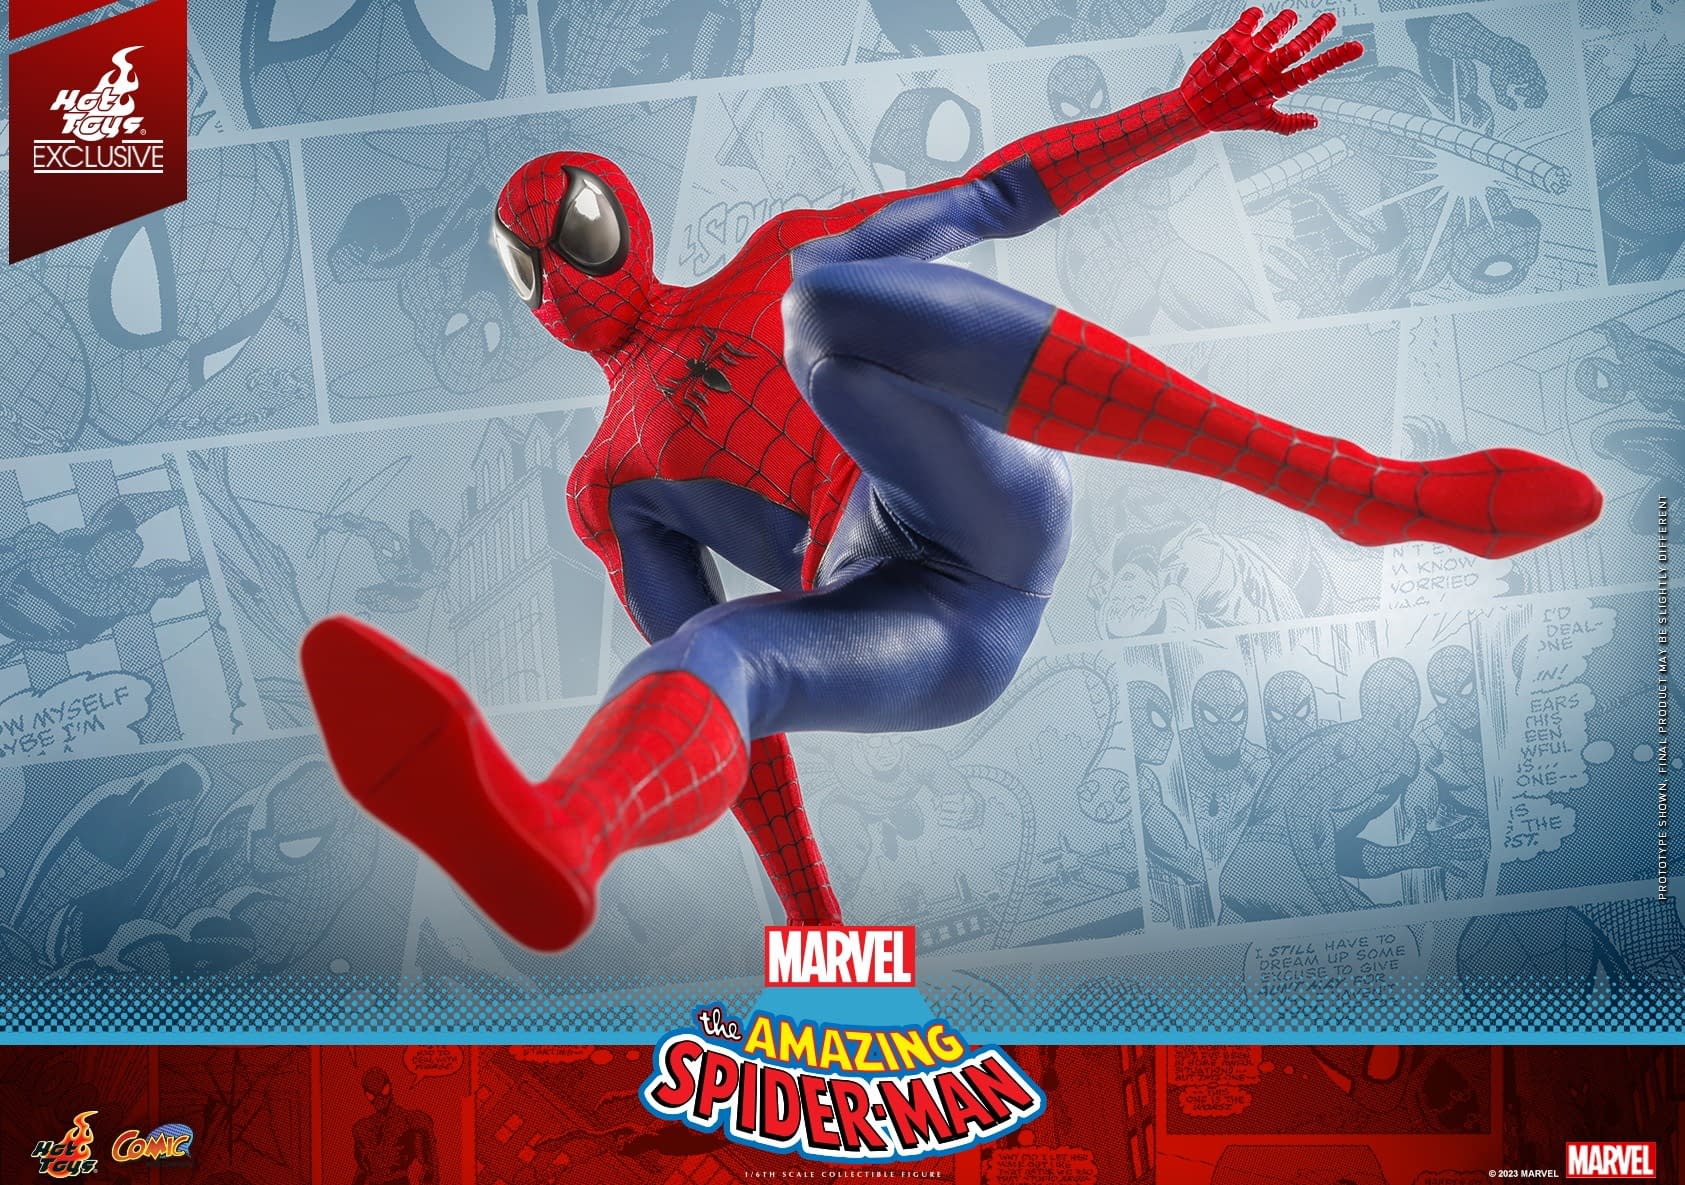 Spider-Man Receives Exclusive Marvel Comics 1/6 Figure from Hot Toys11